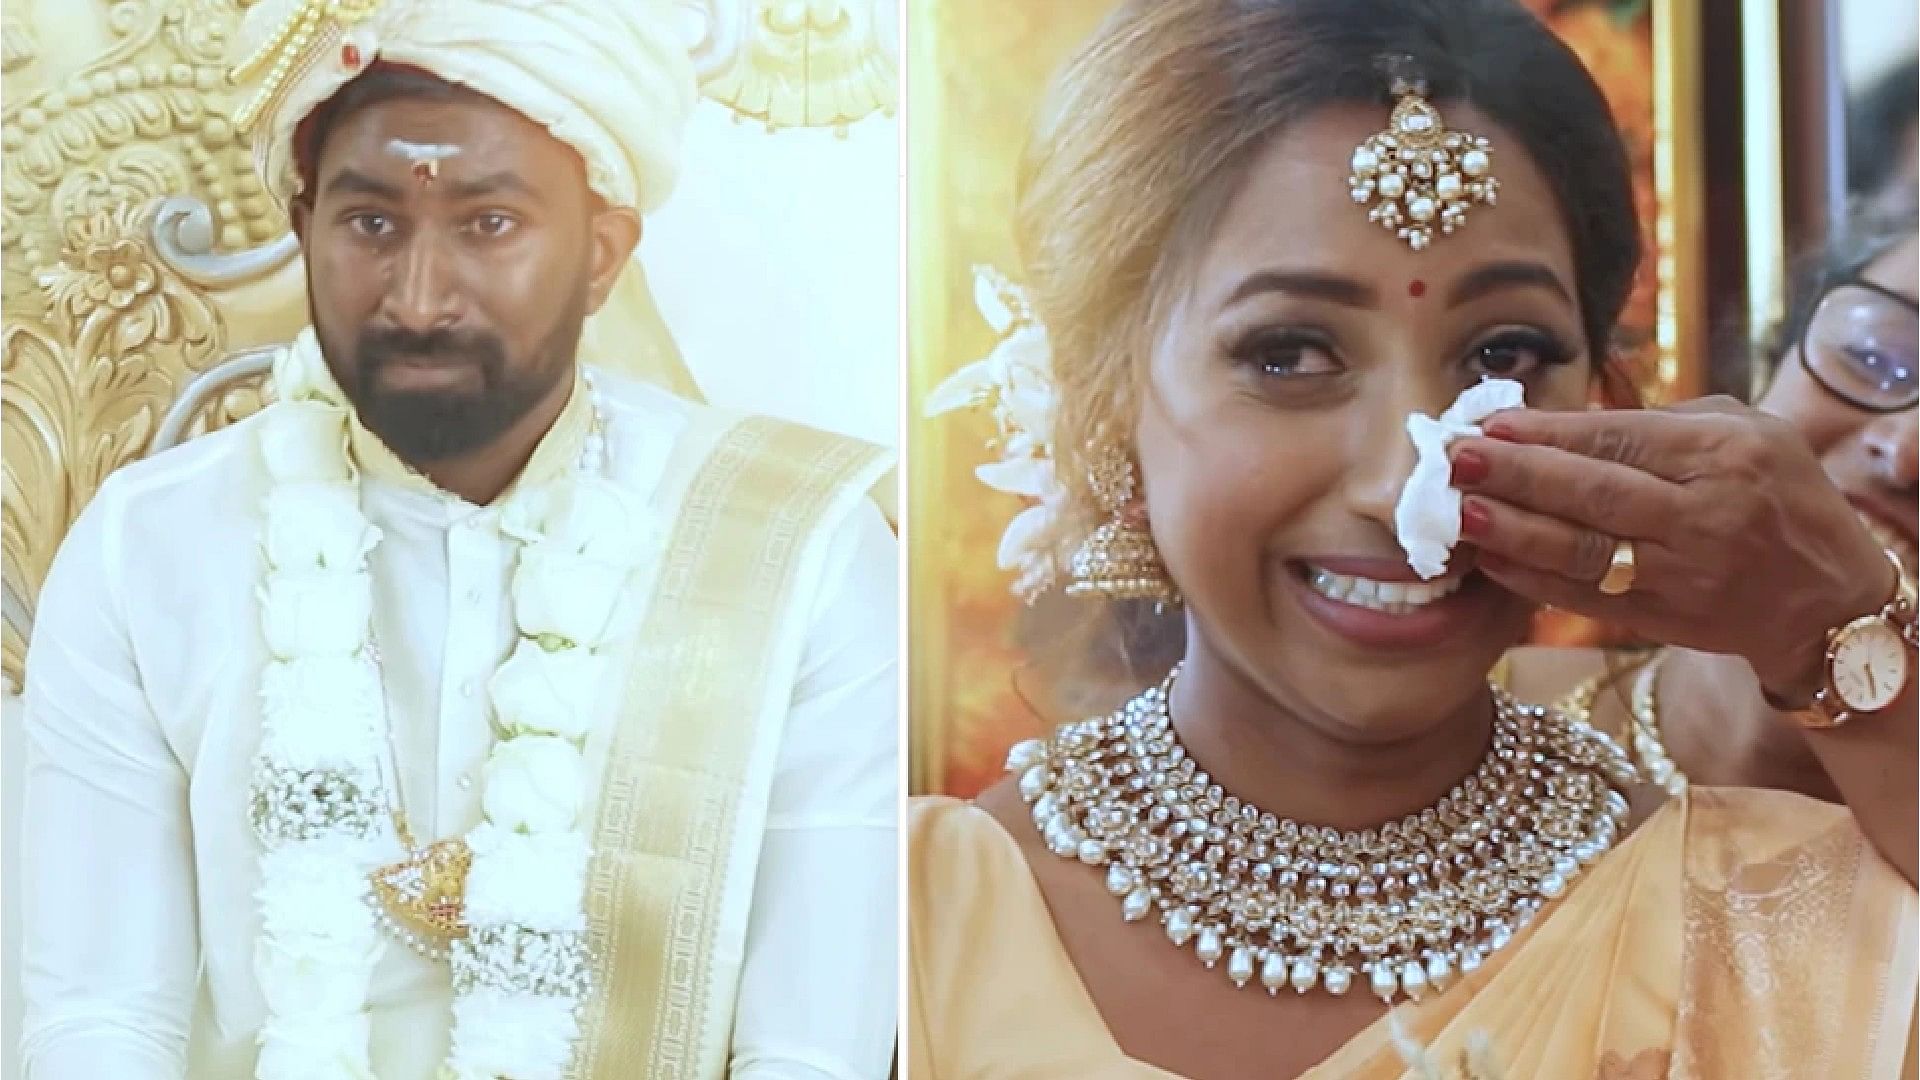 Bride Groom Video The bride cried seeing the groom's face video went viral